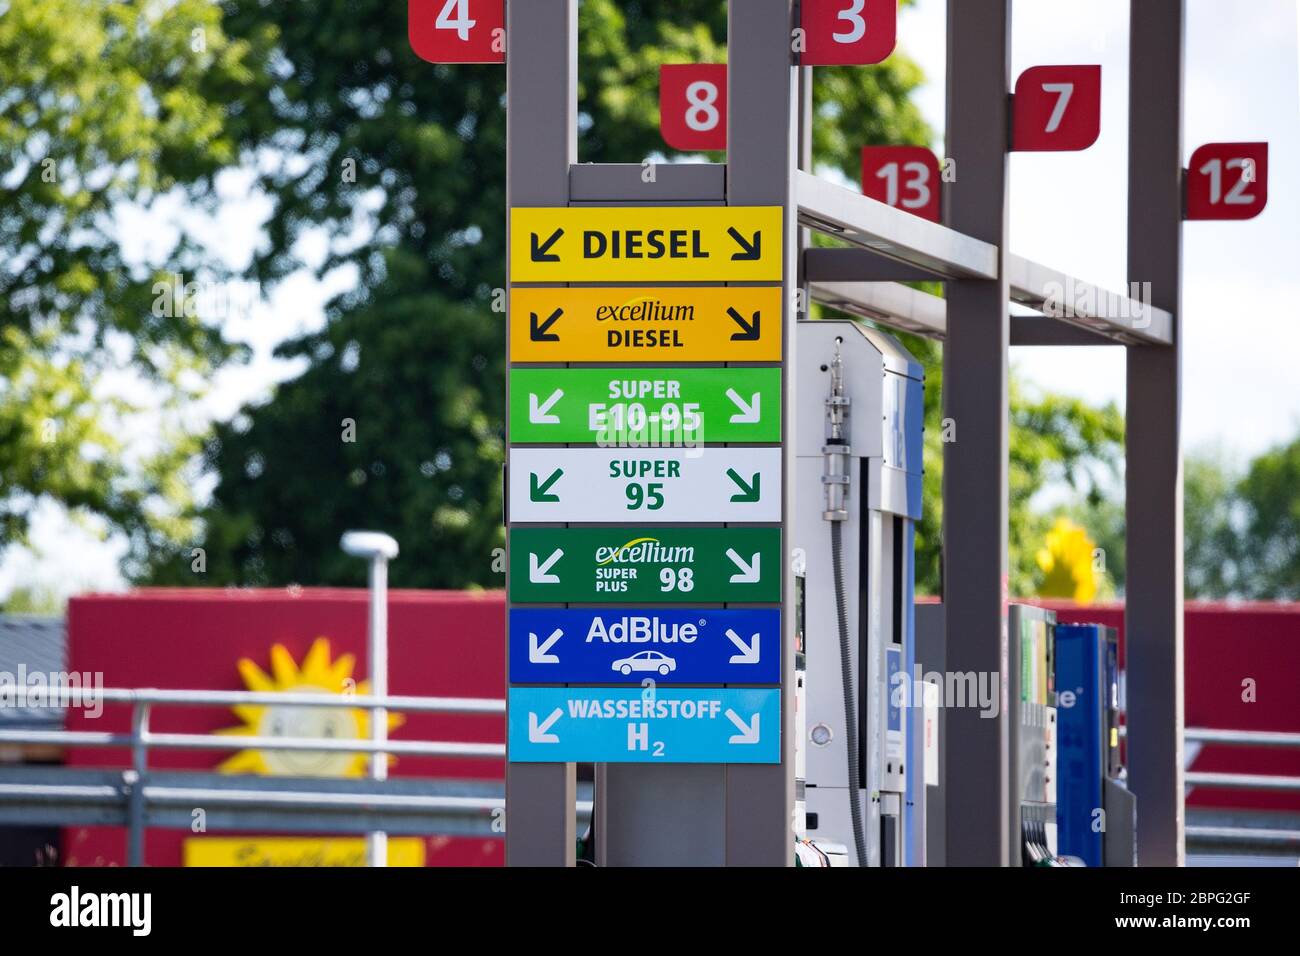 Osnabrueck, Germany May 17th, 2020: Symbolic images - 2020 petrol pump of a total petrol station, Diesel, Super E10, Super, Super +, Excellium, AdBlue, hydrogen, H2, logo, lettering, feature / symbol / symbolic photo / characteristic / detail / | usage worldwide Stock Photo